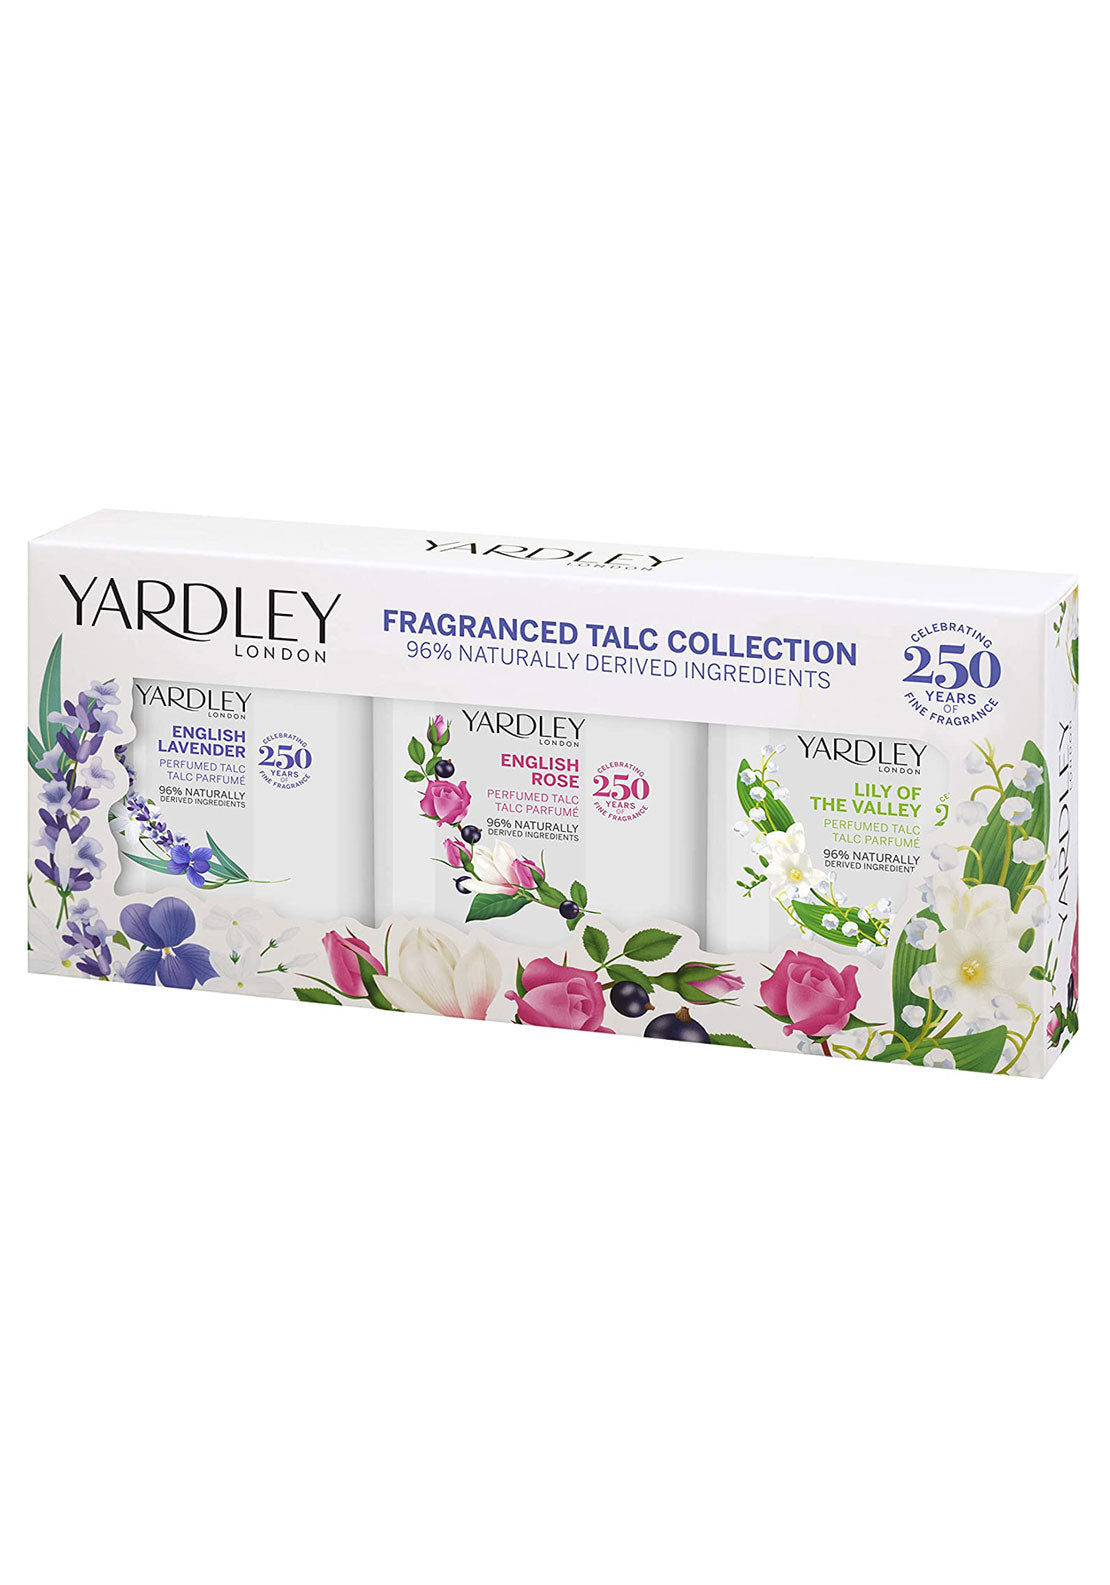 Yardley Fragranced Talc Collection 50ml 3 Piece Gift Set 1 Shaws Department Stores